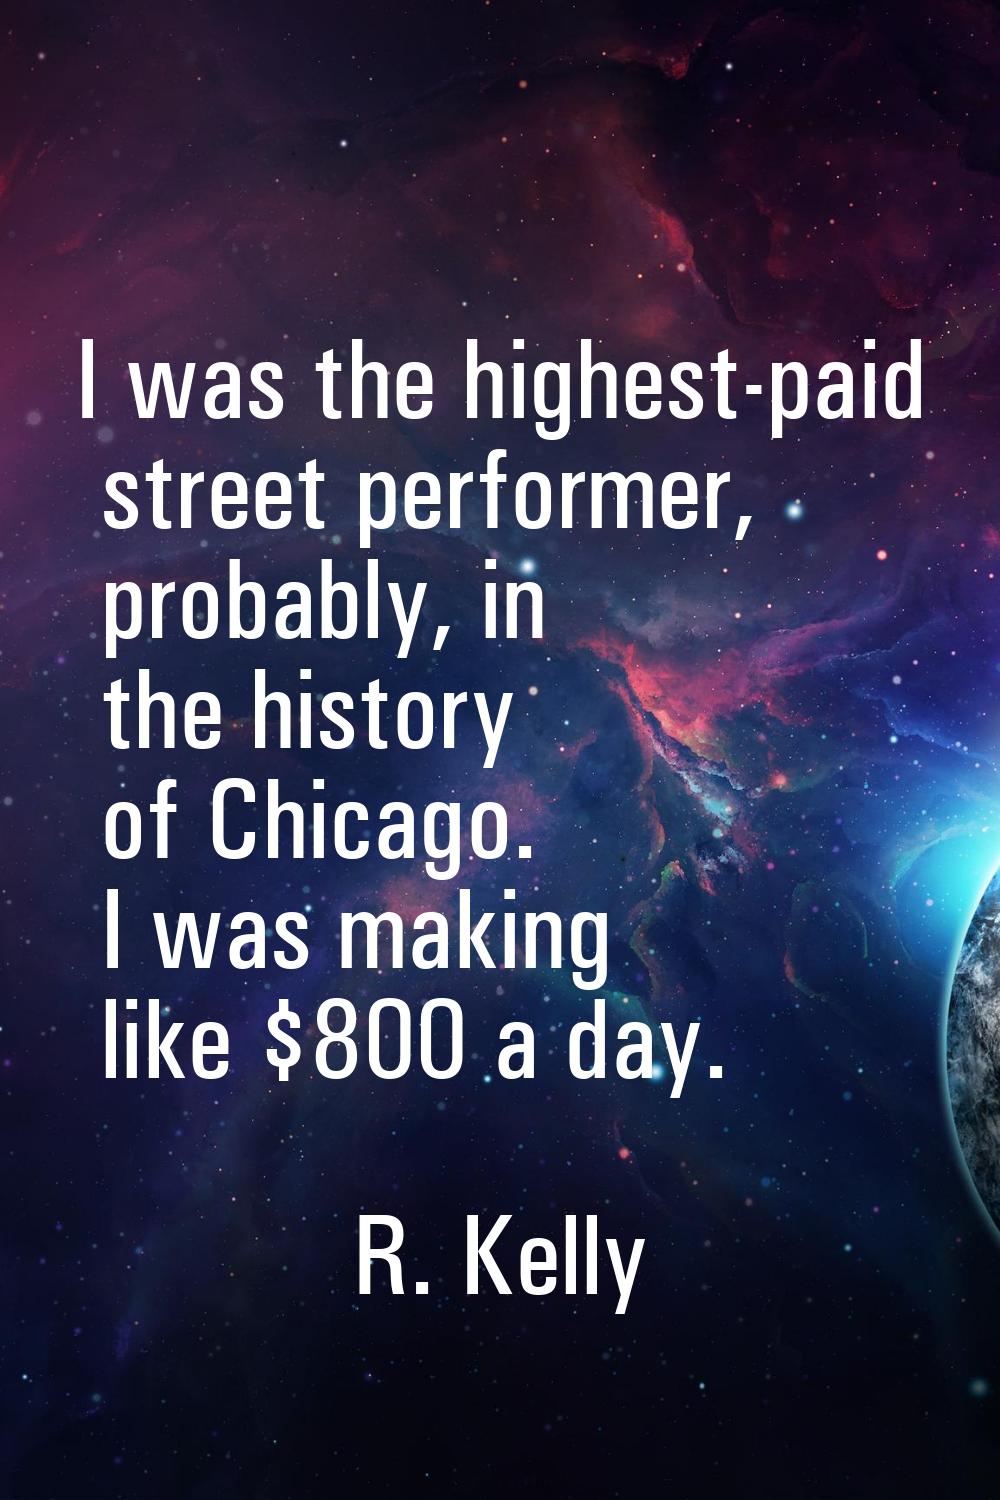 I was the highest-paid street performer, probably, in the history of Chicago. I was making like $80